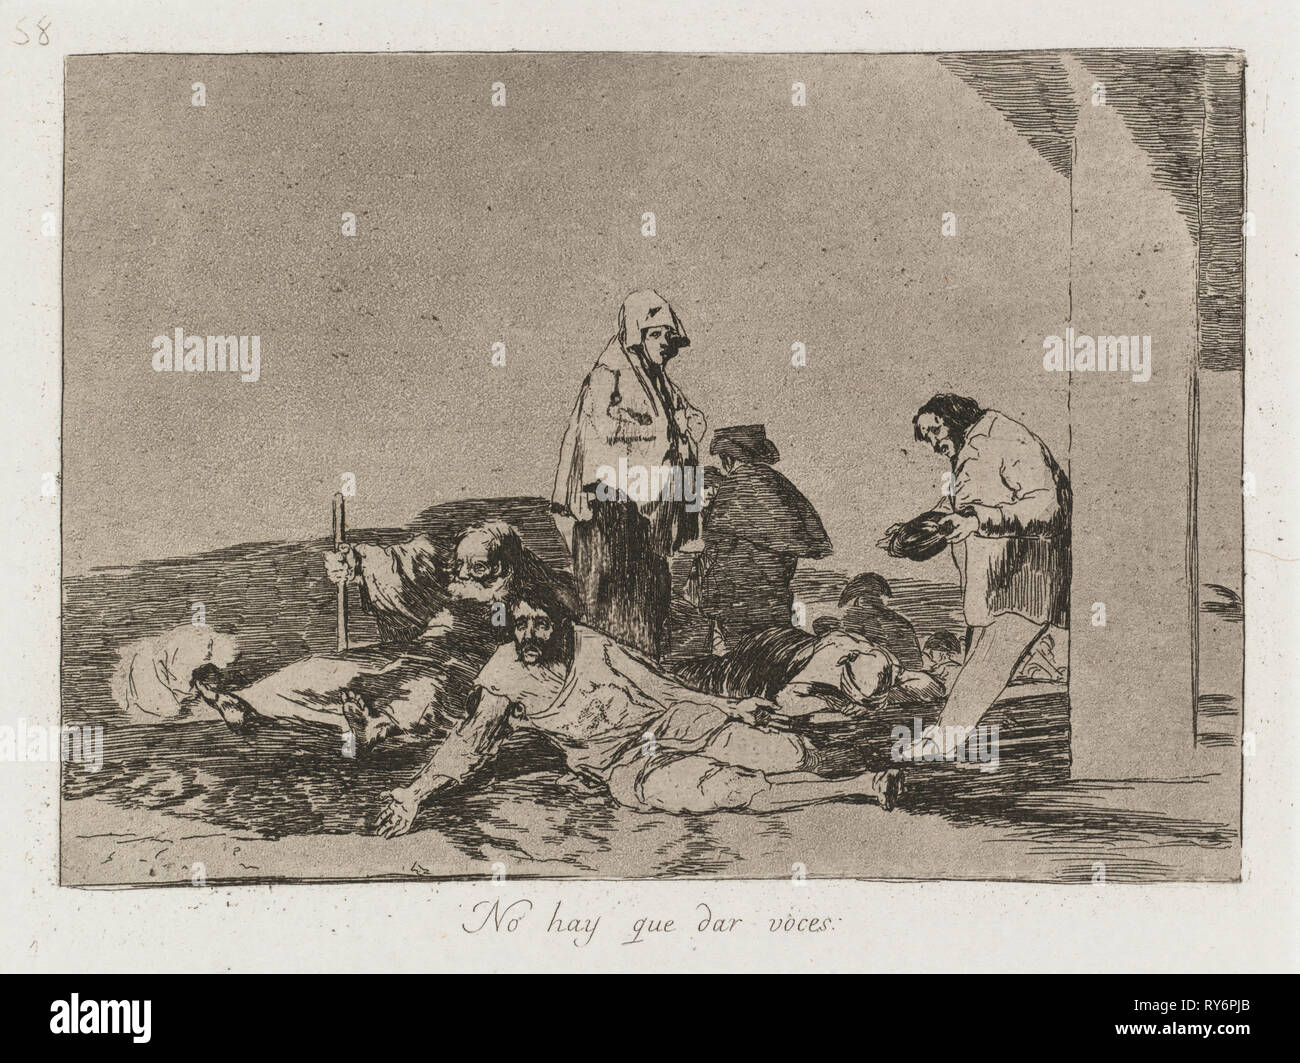 Disasters of War: Pl. 58, It is no use shouting , 1810-1813. Francisco de Goya (Spanish, 1746-1828), Real Academia. Etching and aquatint; sheet: 25.1 x 34.1 cm (9 7/8 x 13 7/16 in.); platemark: 15.2 x 20.5 cm (6 x 8 1/16 in.); to borderline: 12.7 x 18.1 cm (5 x 7 1/8 in Stock Photo